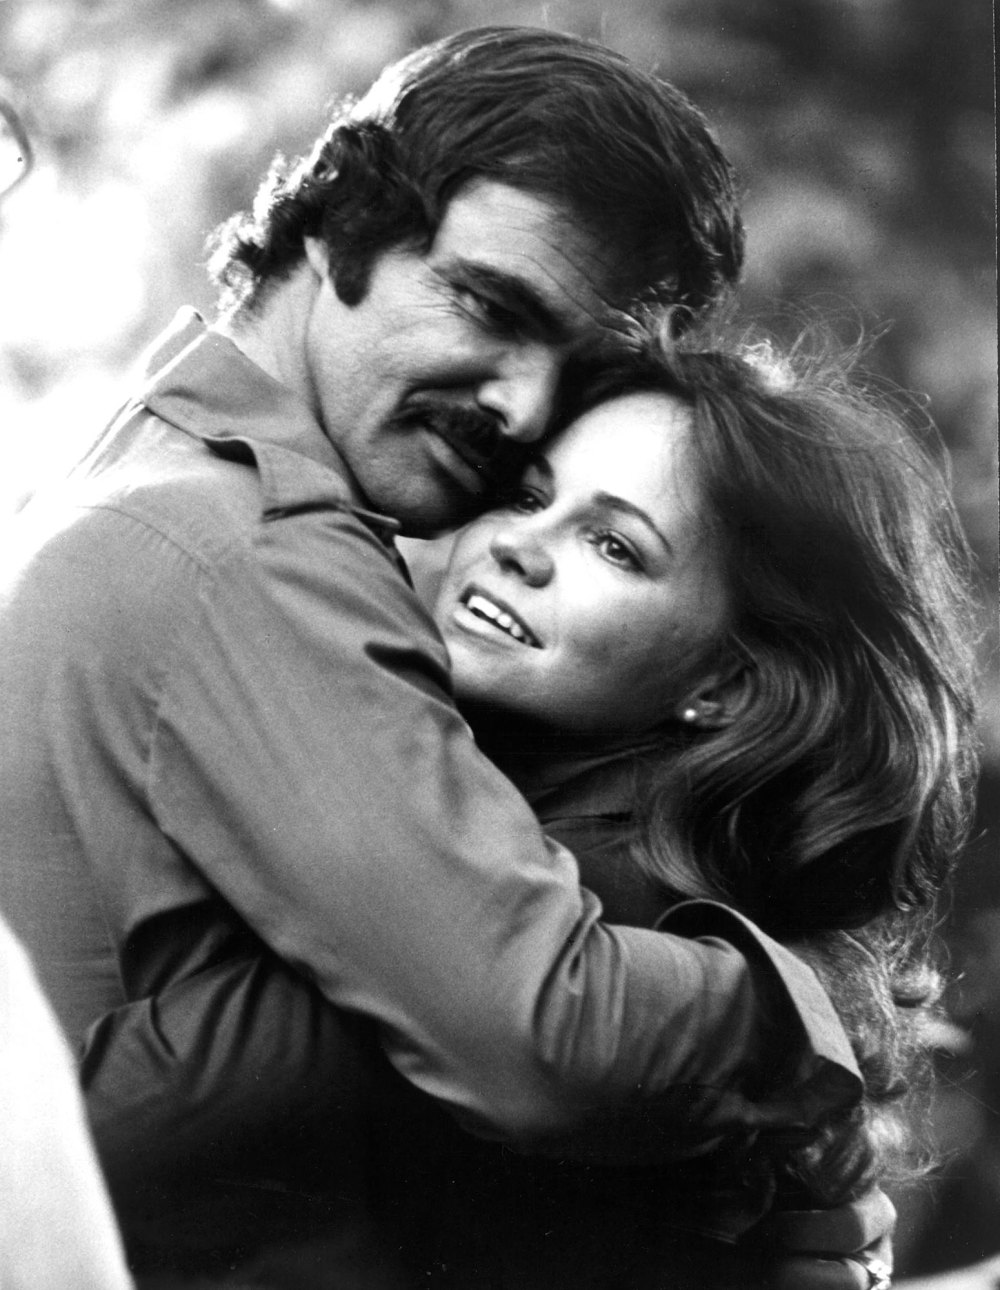 Burt Reynolds Calls Sally Field the Love of His Life: “I Miss Her Terribly”